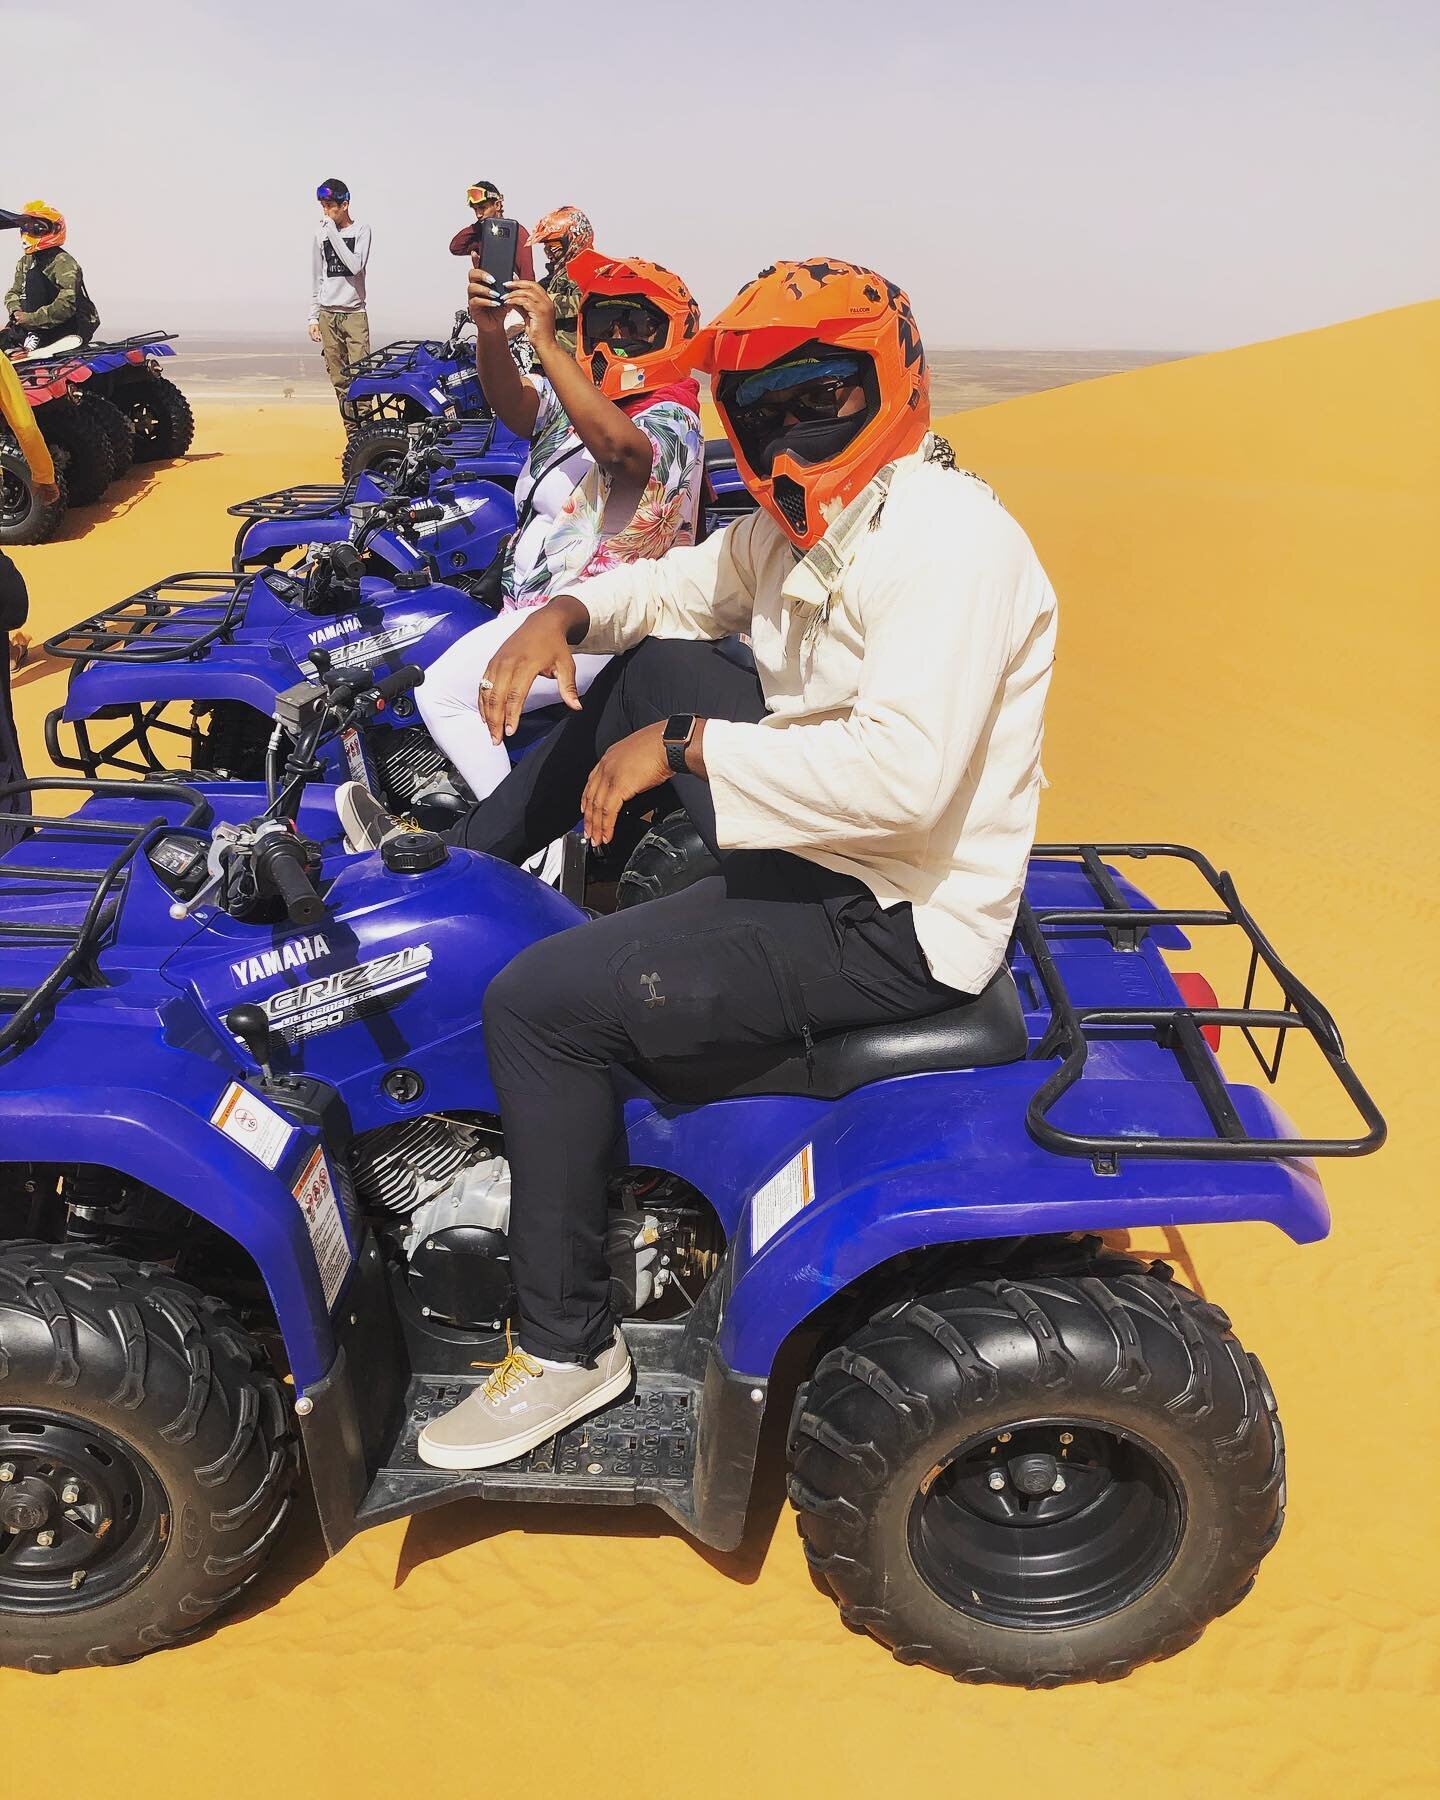 Peww on that Yamaha! Out here getting busy in this desert.

4-wheelers in the Sahara ✅
Sandboard down the Sandy cliff ✅

I mean I&rsquo;m just knocking em out
&bull;
&bull;
&bull;
#TyMeetsMorocco #travelingnegus #saharadesertmorocco #AightIReallyNeed